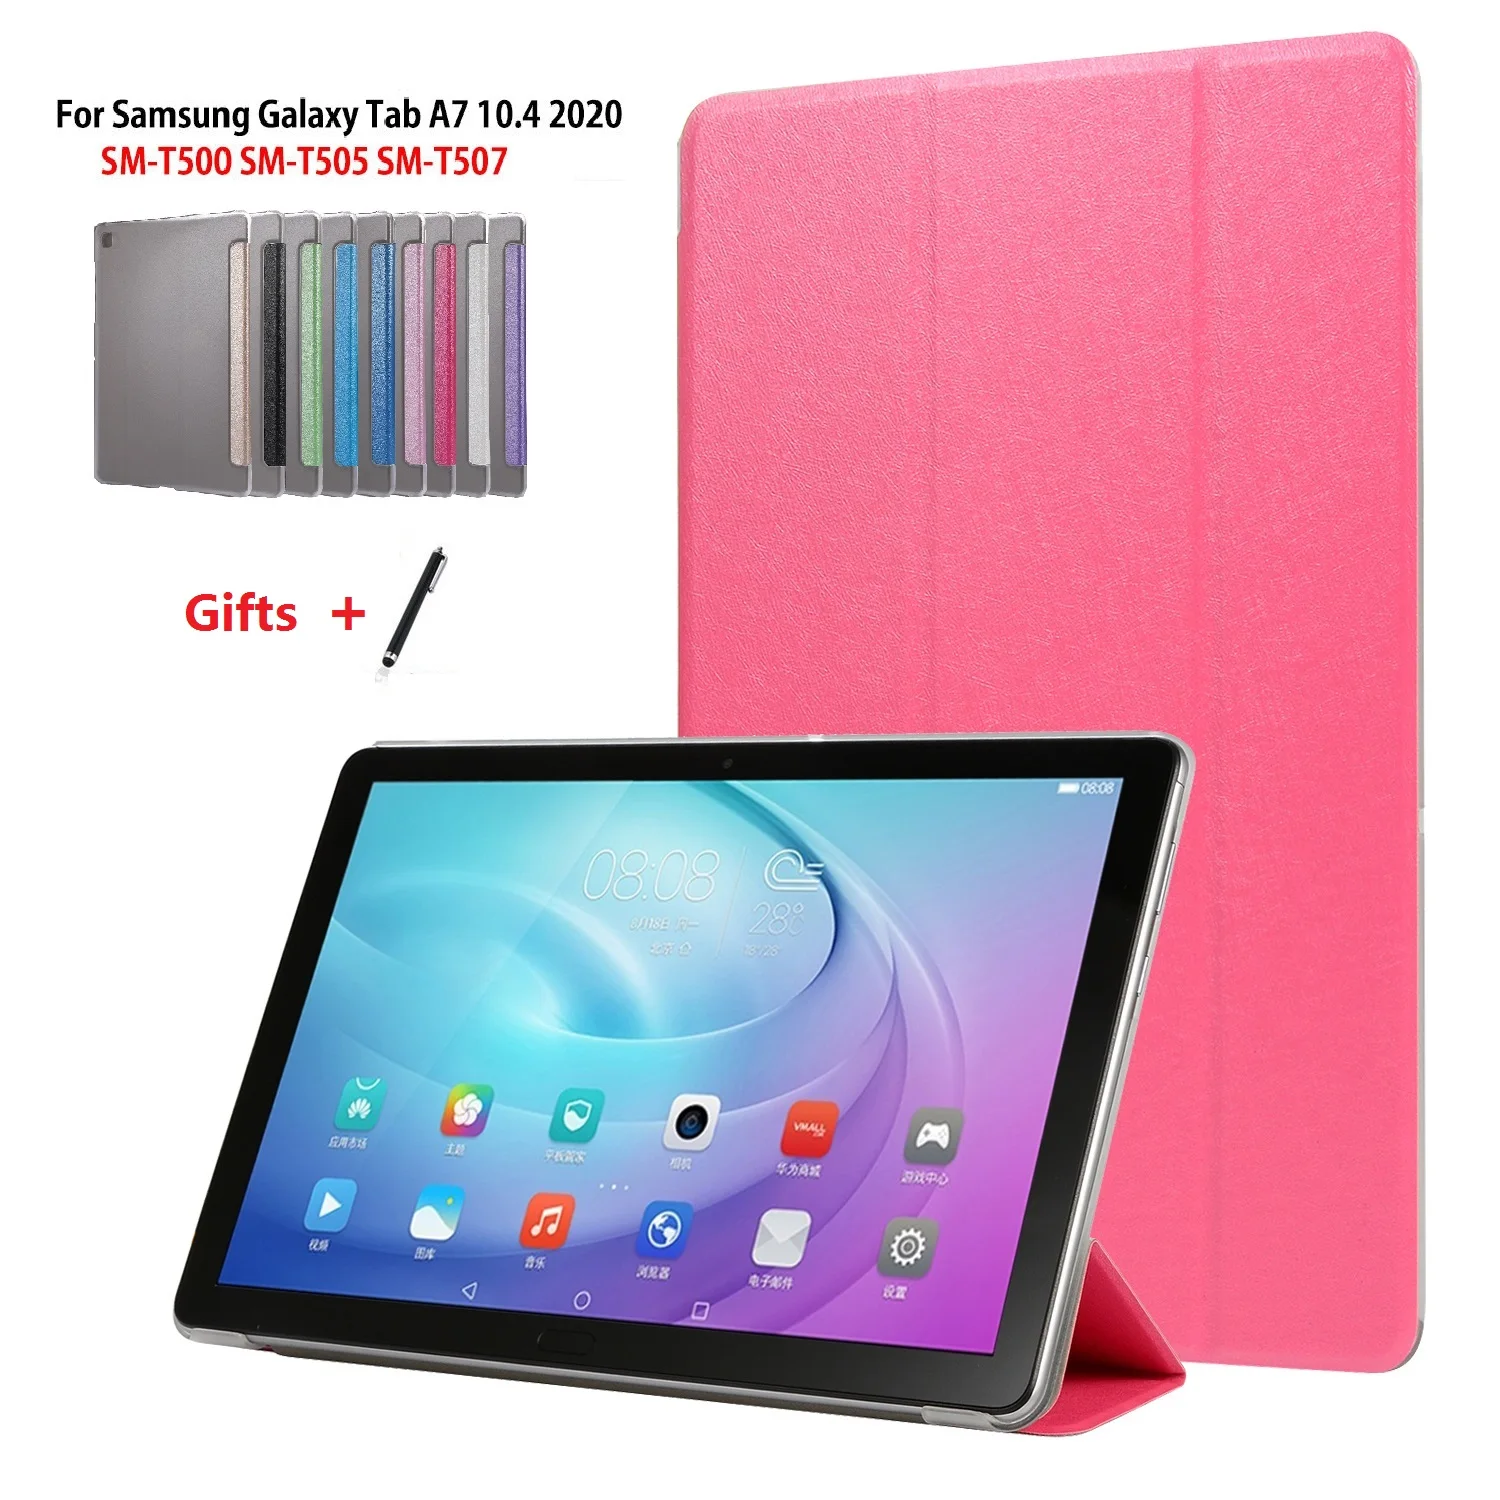 

Tablet Case cover For New Samsung Galaxy Tab A7 2020 10.4" models SM-T500 SM-T505 SM-T507 Lightweight Shell Capa + Free stylus